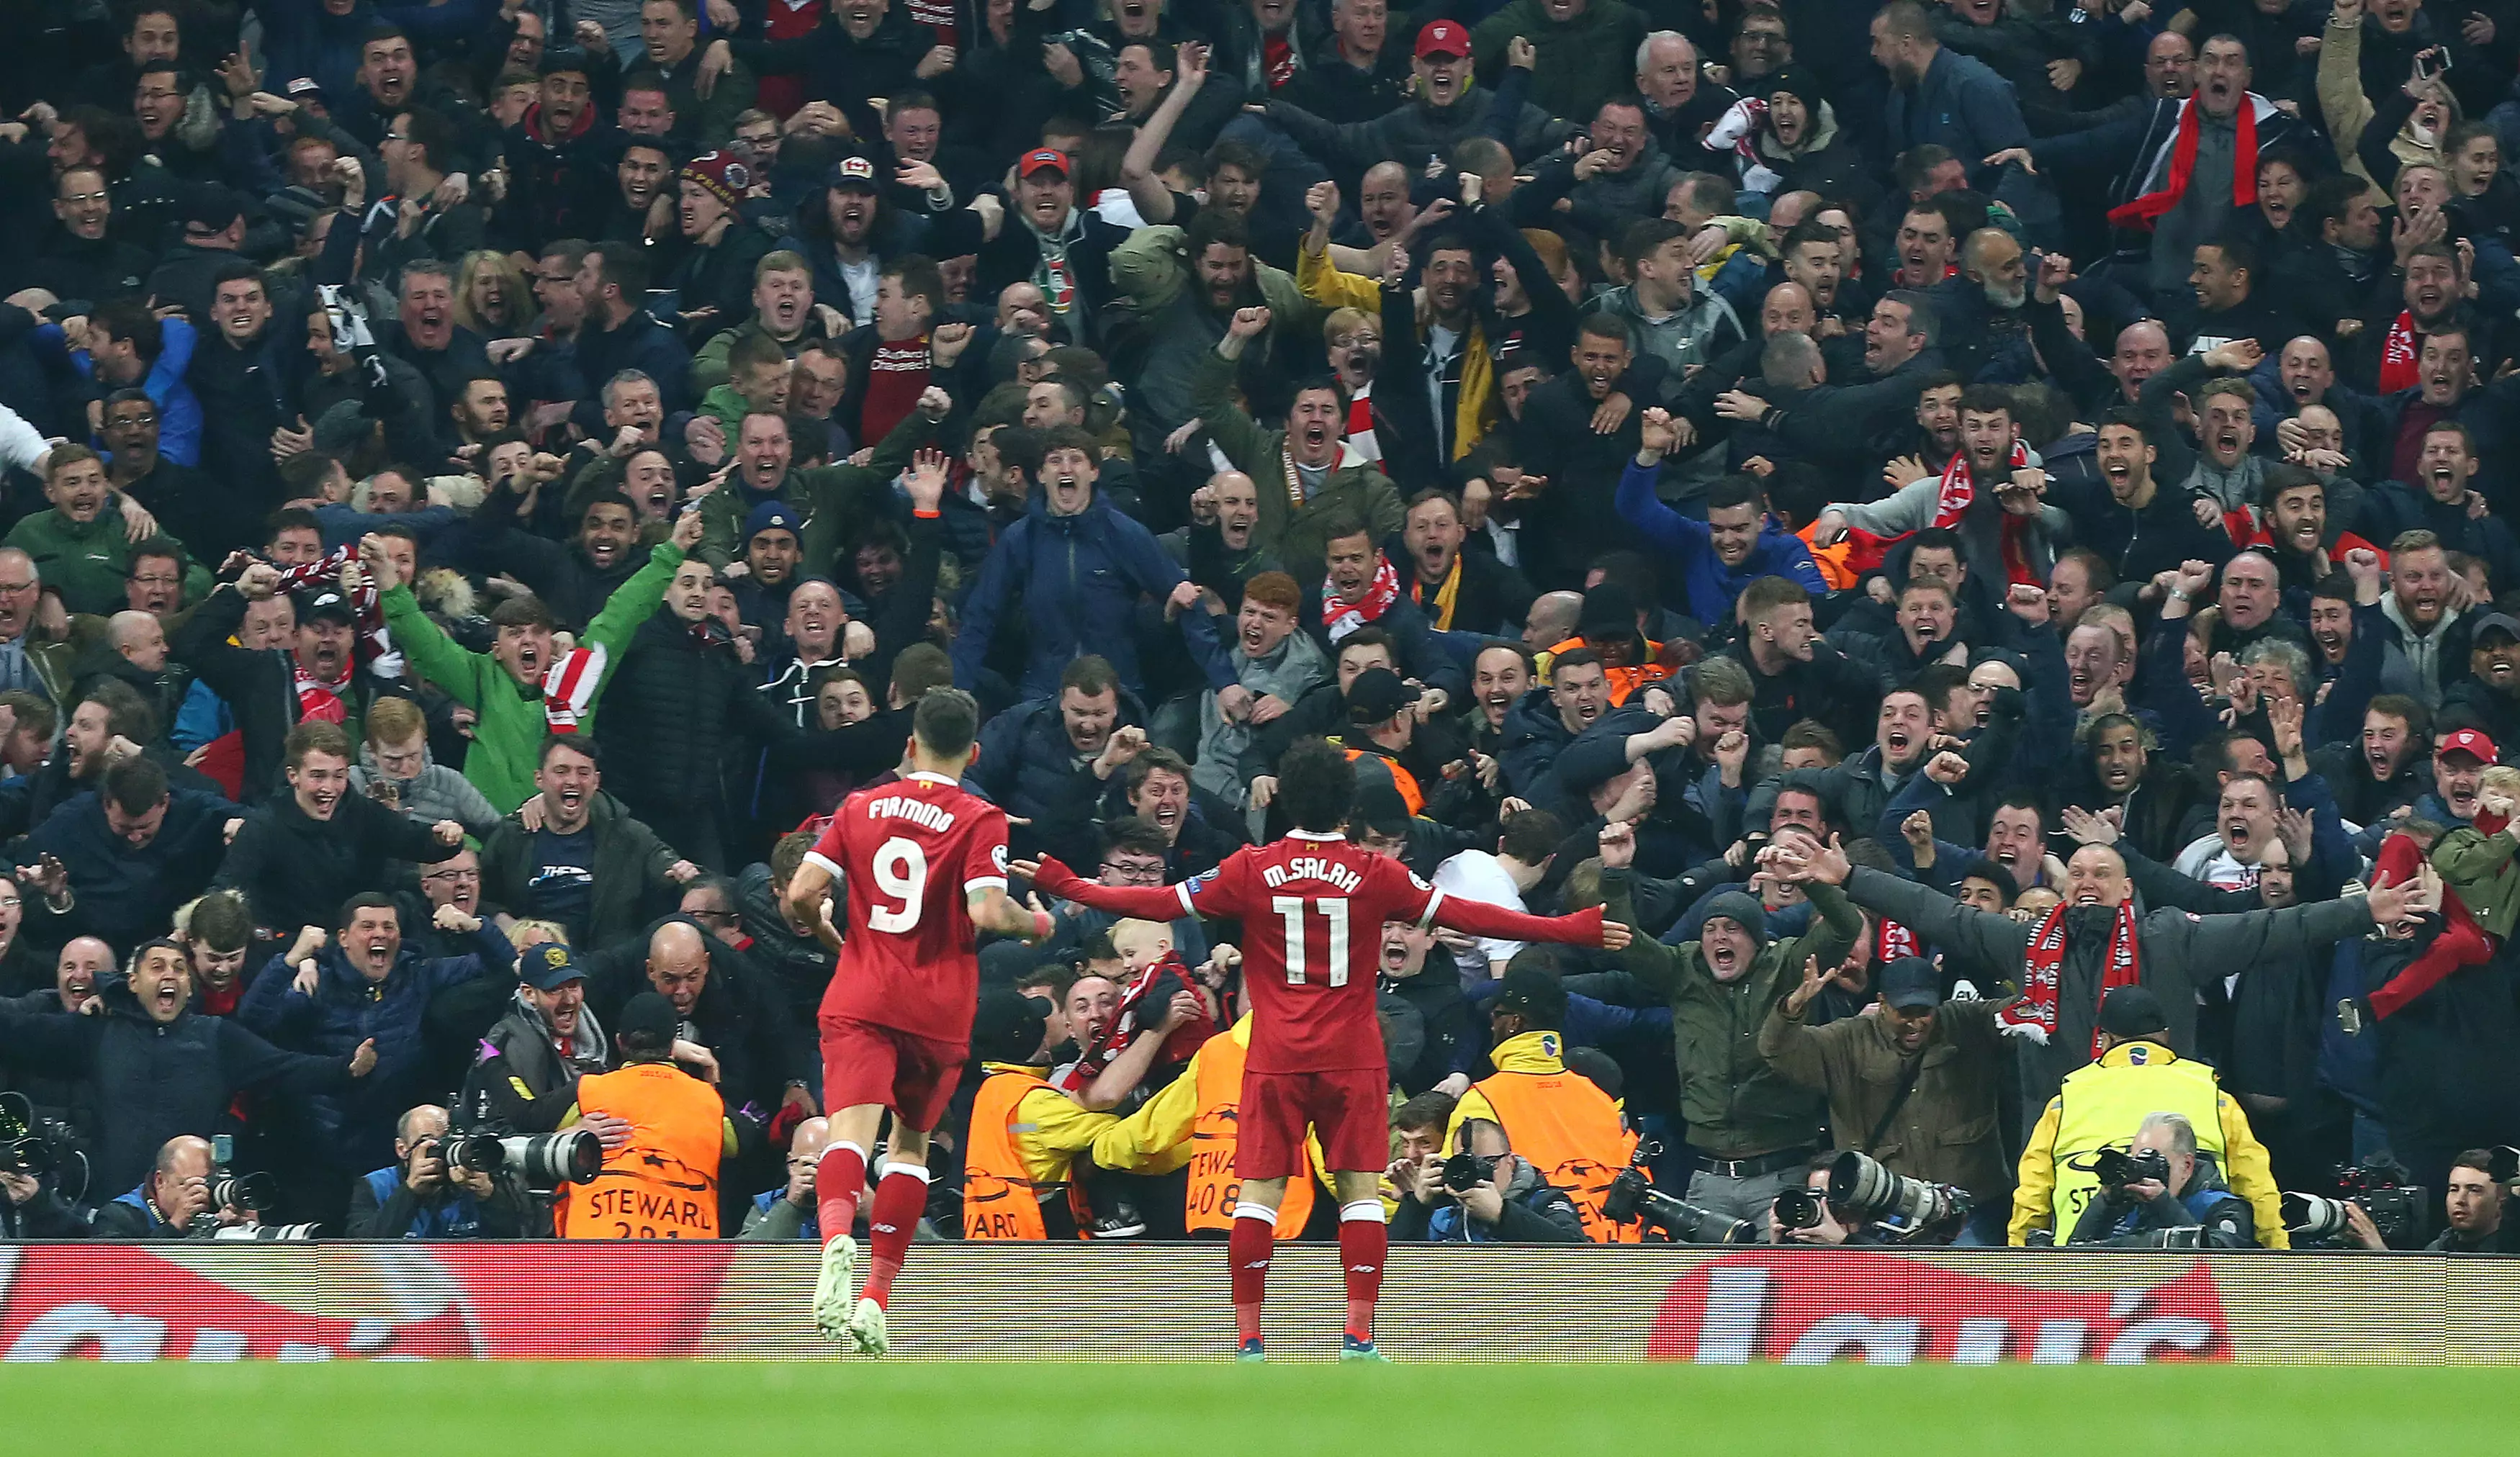 Salah celebrates scoring in front of the traveling Liverpool support. Image: PA